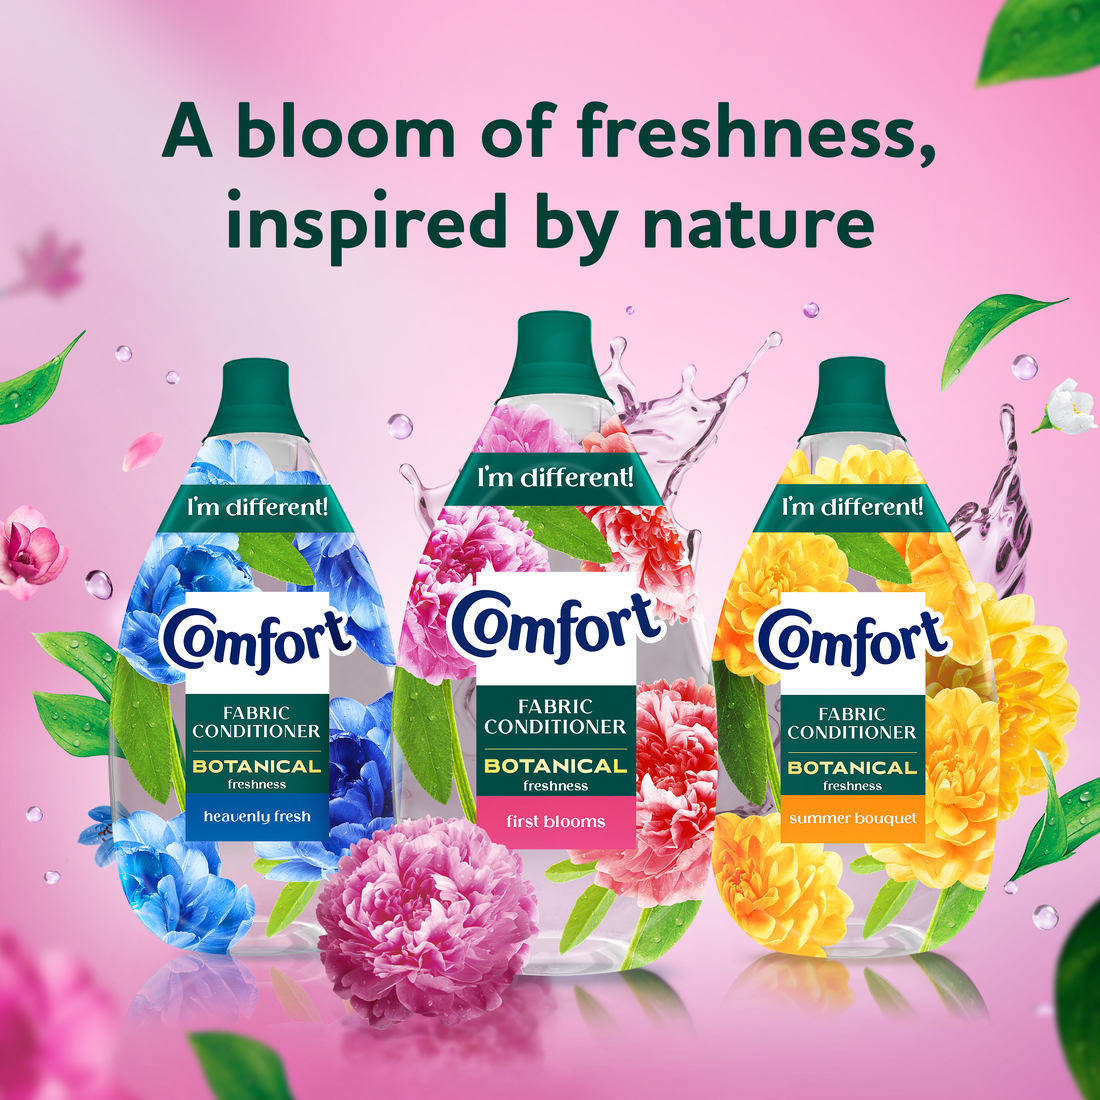 A bloom of freshness, inspired by nature